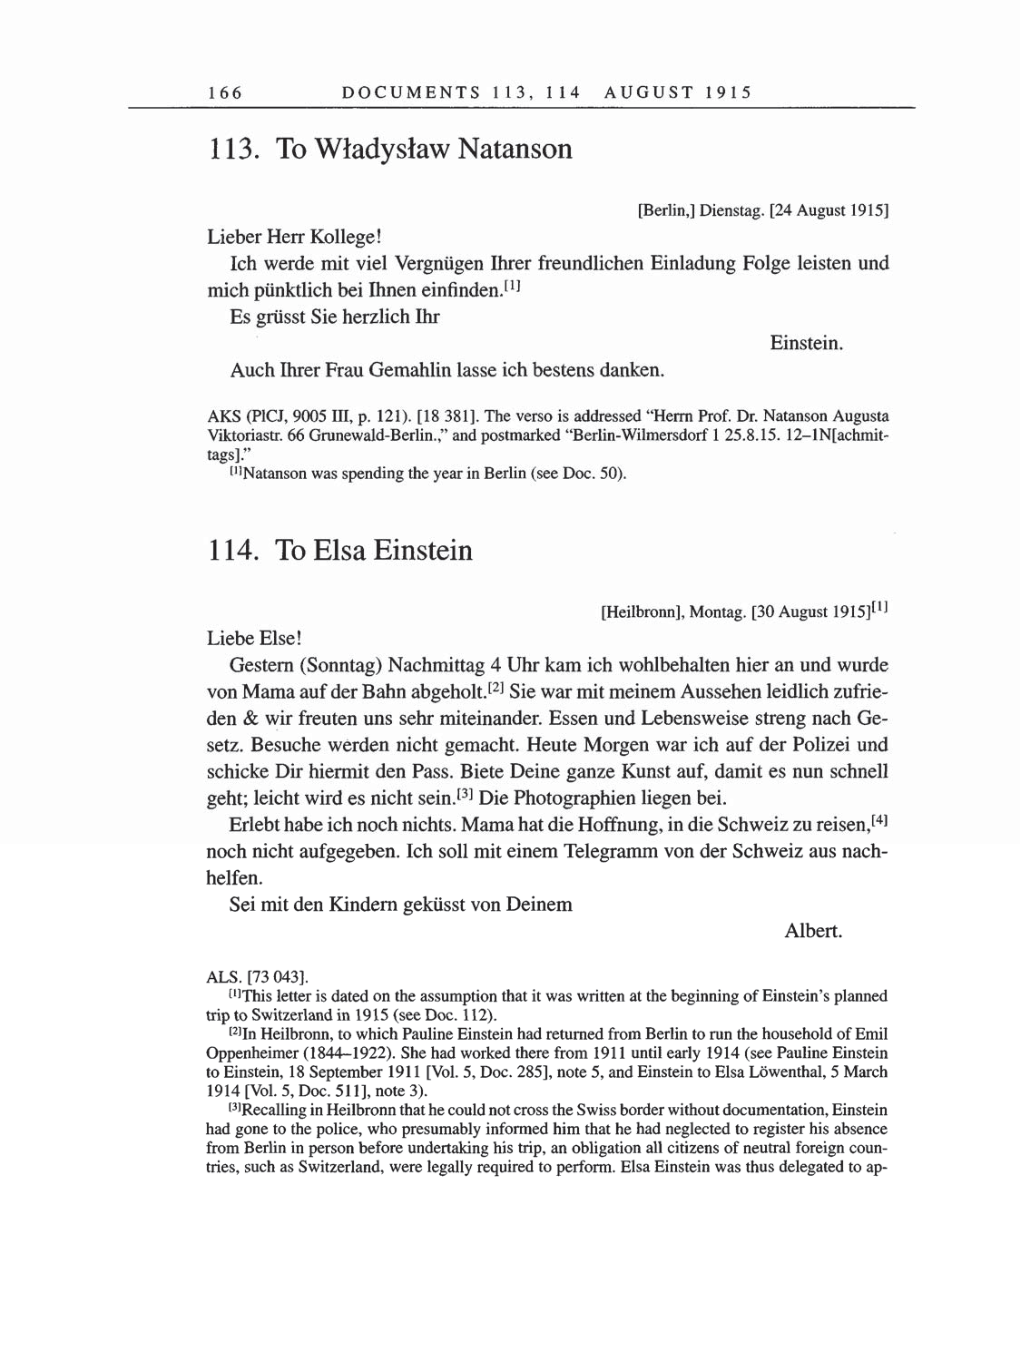 Volume 8, Part A: The Berlin Years: Correspondence 1914-1917 page 166